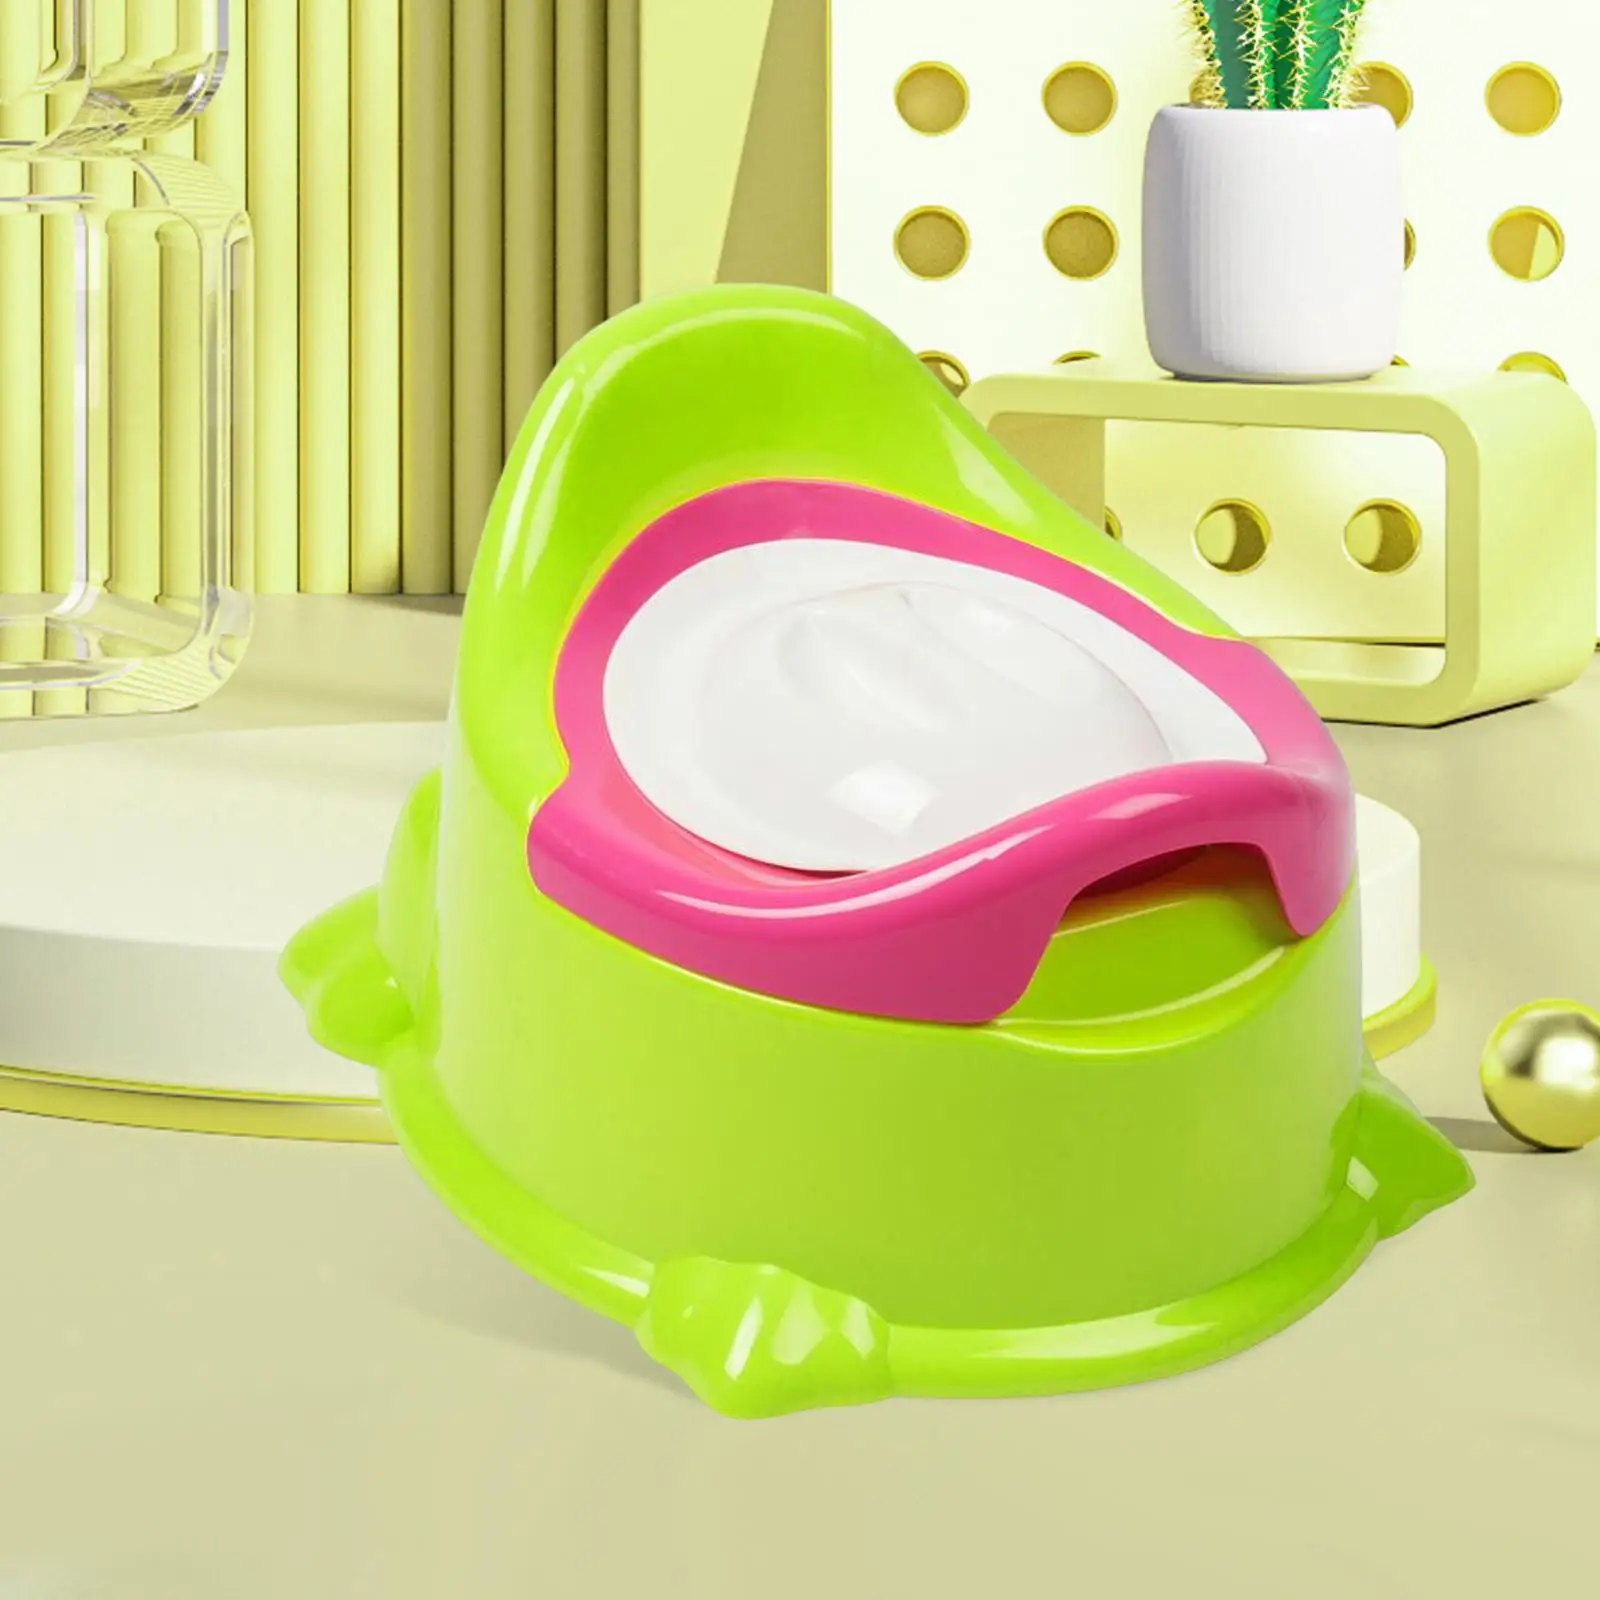 Childrens Potty Toilet Training Seat Easy Clean for Babies 6-12 Month Kids